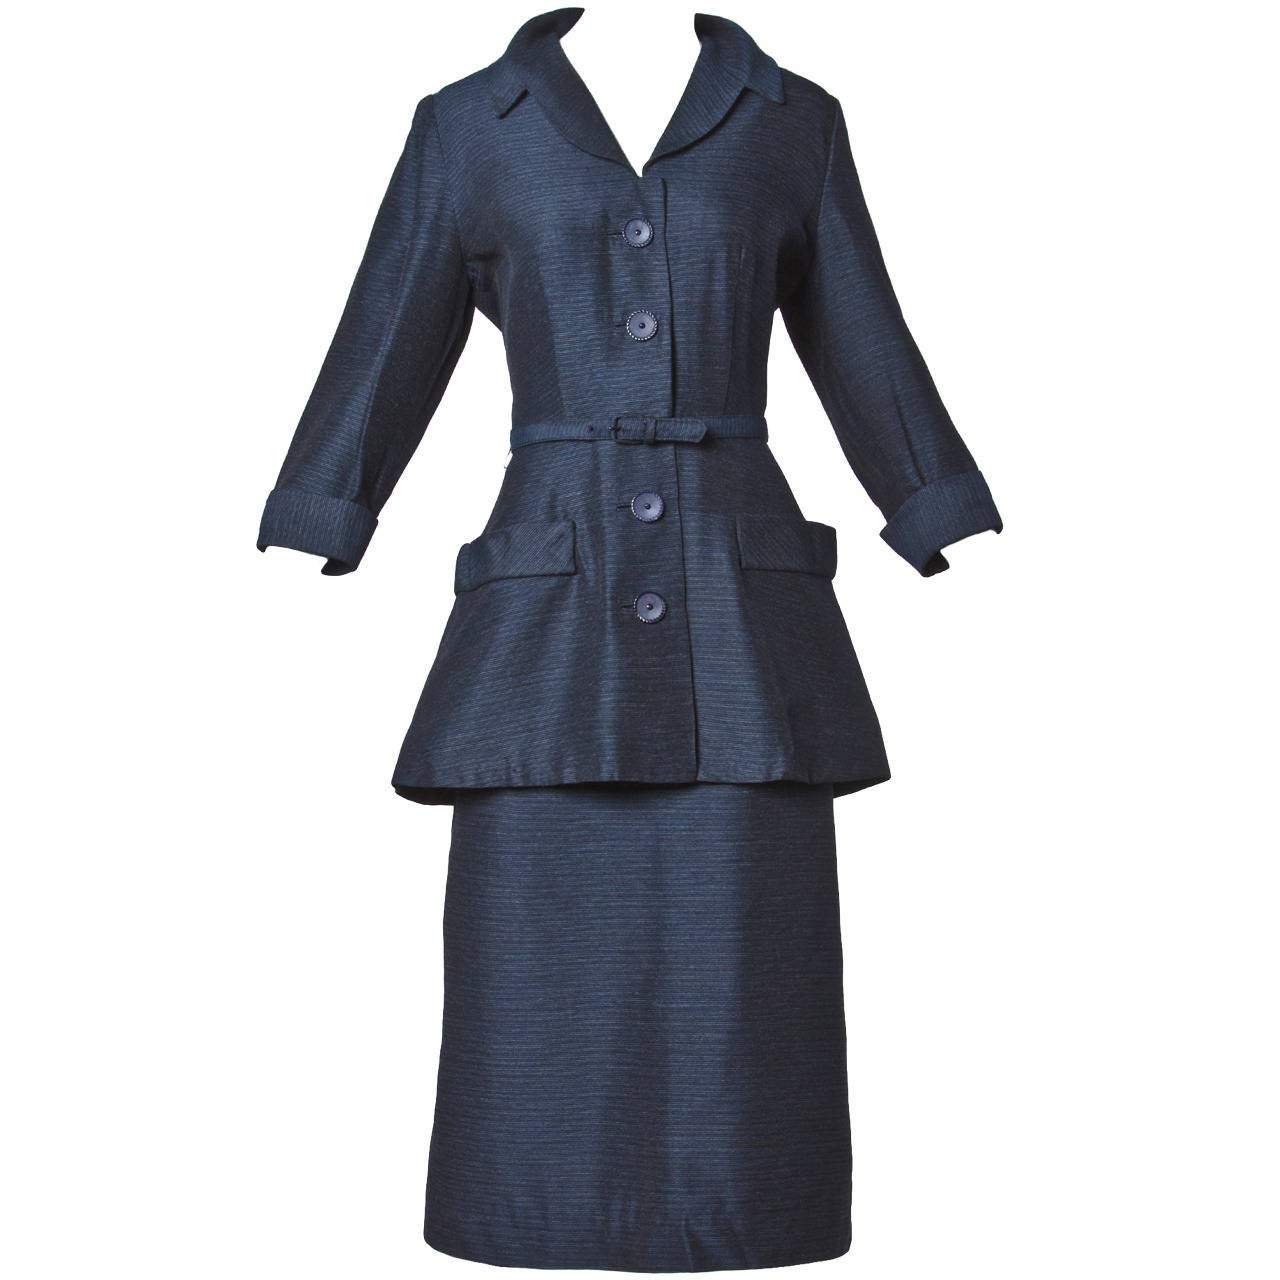 Vintage 1950s 50s Navy Wool and Silk Skirt Suit 3-Piece Ensemble For ...